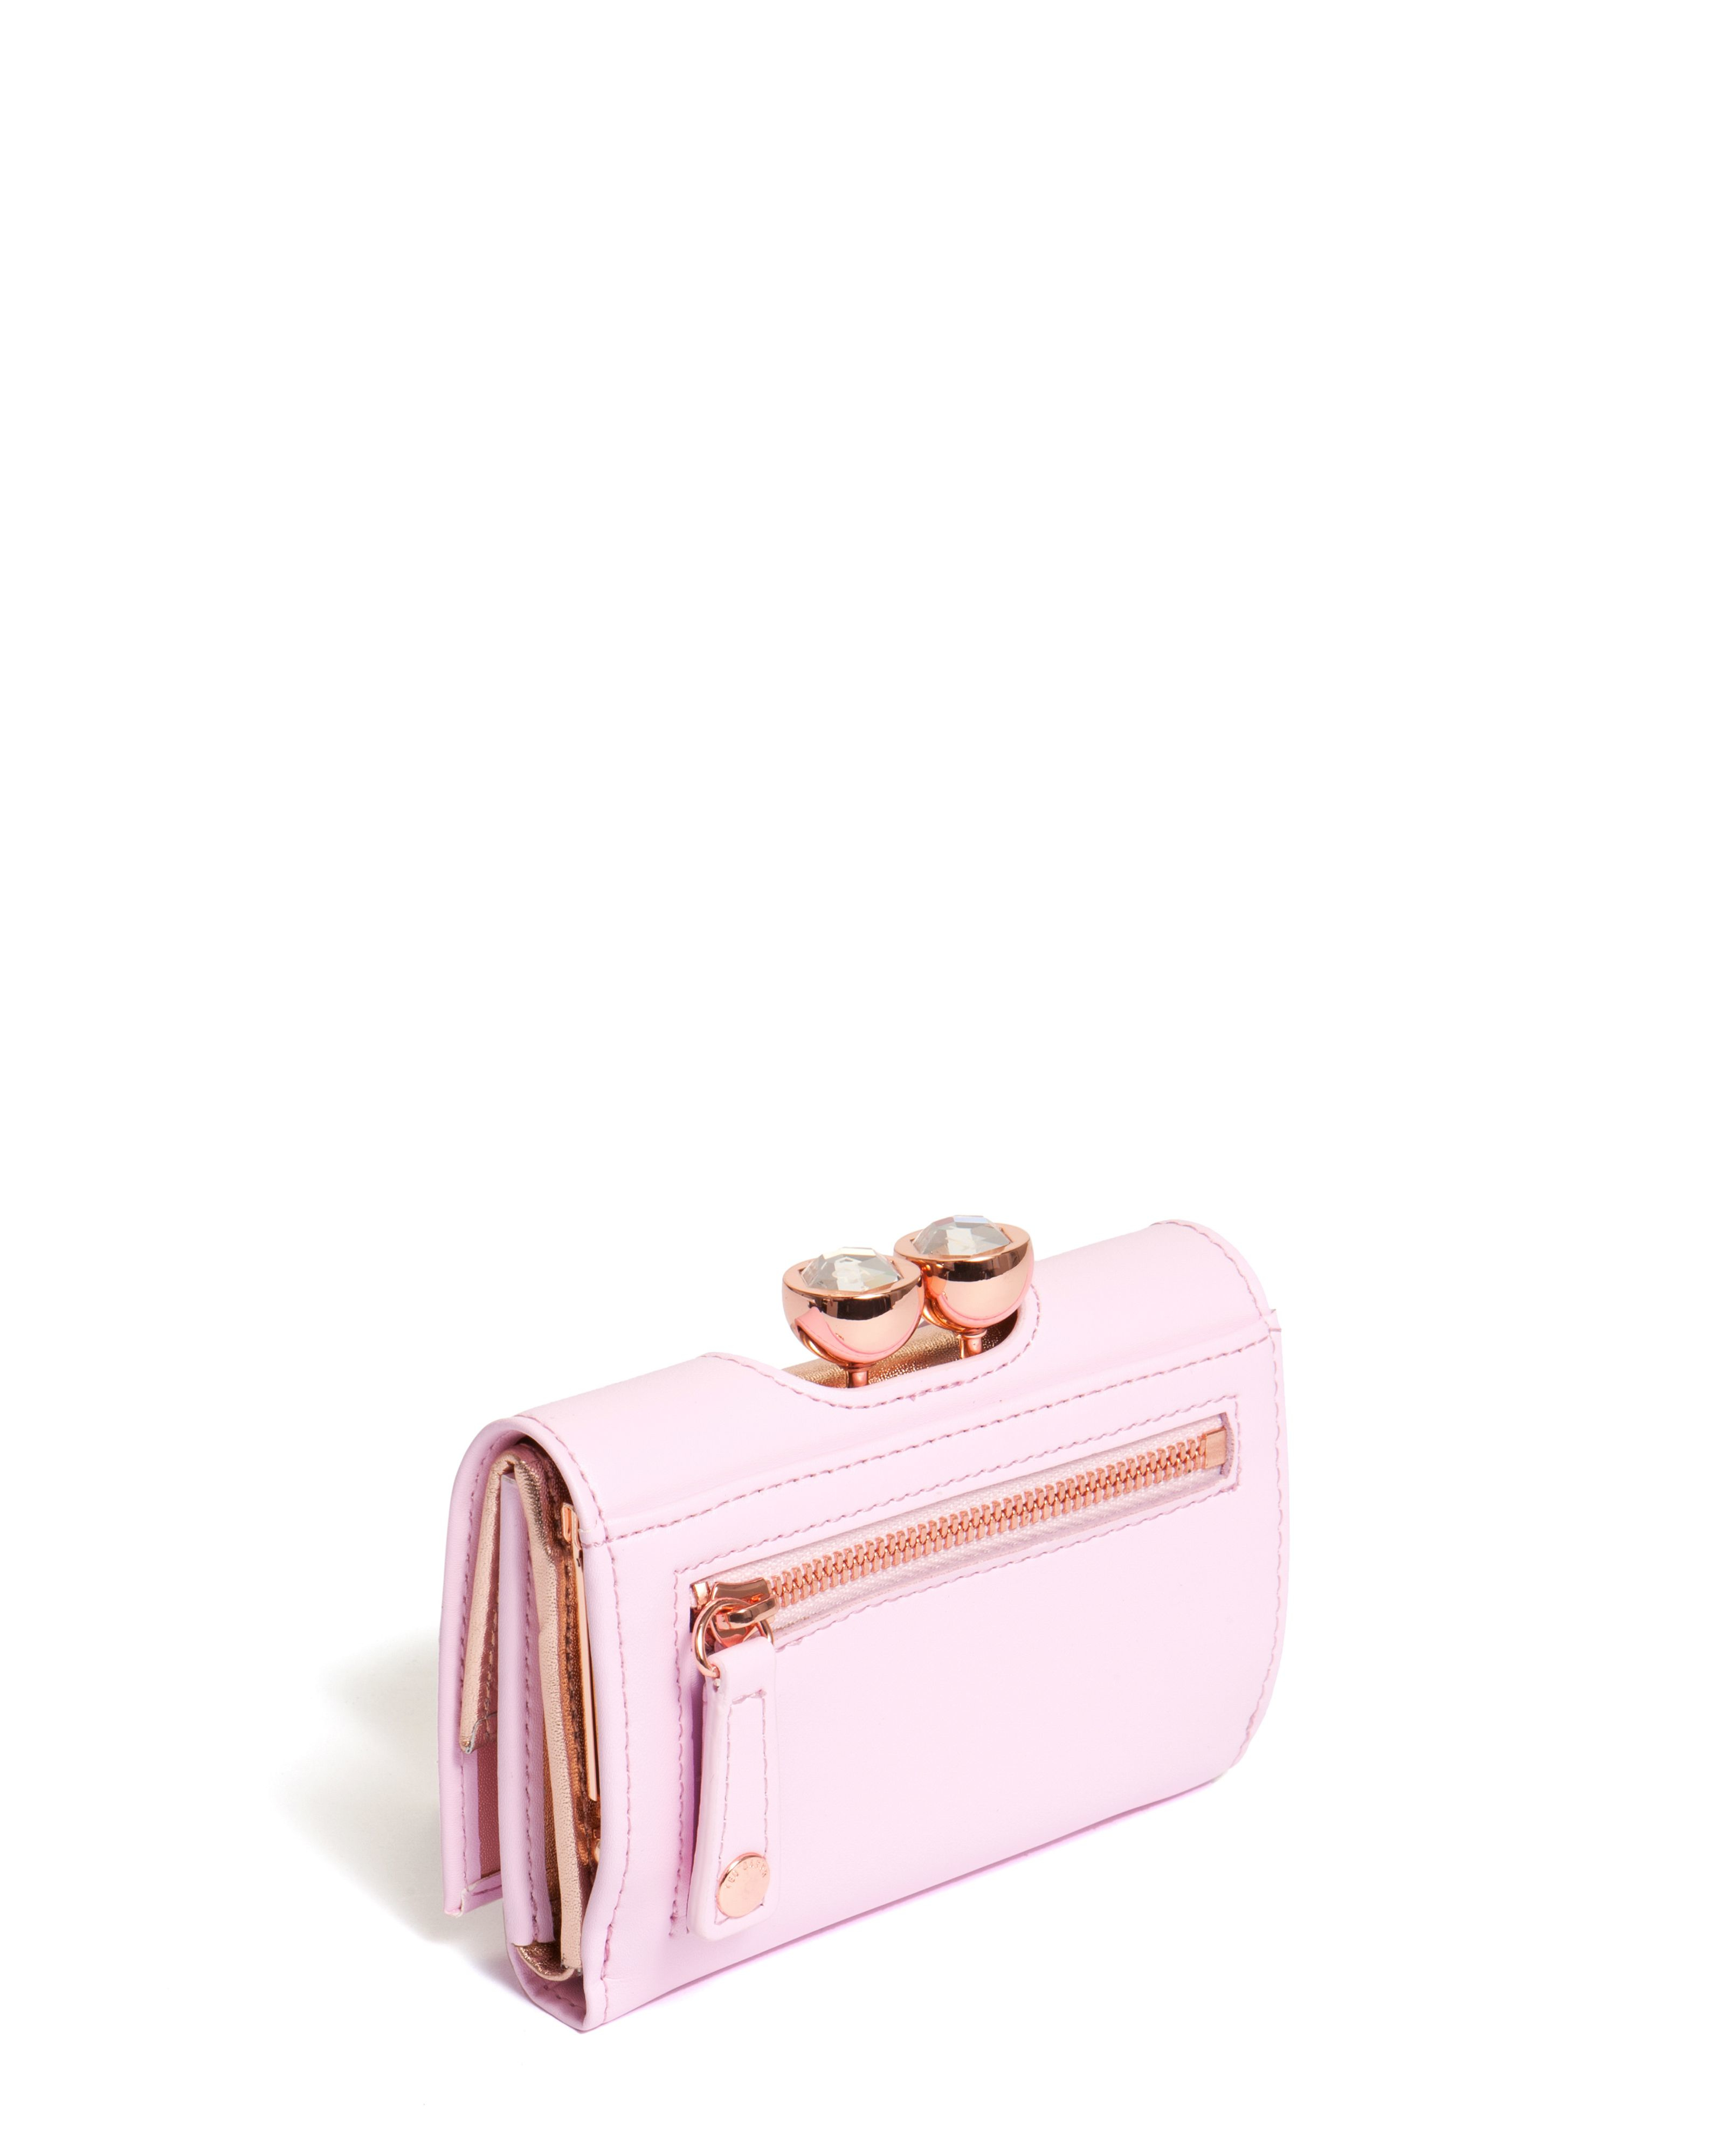 Lyst - Ted baker Shyla Small Leather Crystal Bobble Purse in Pink